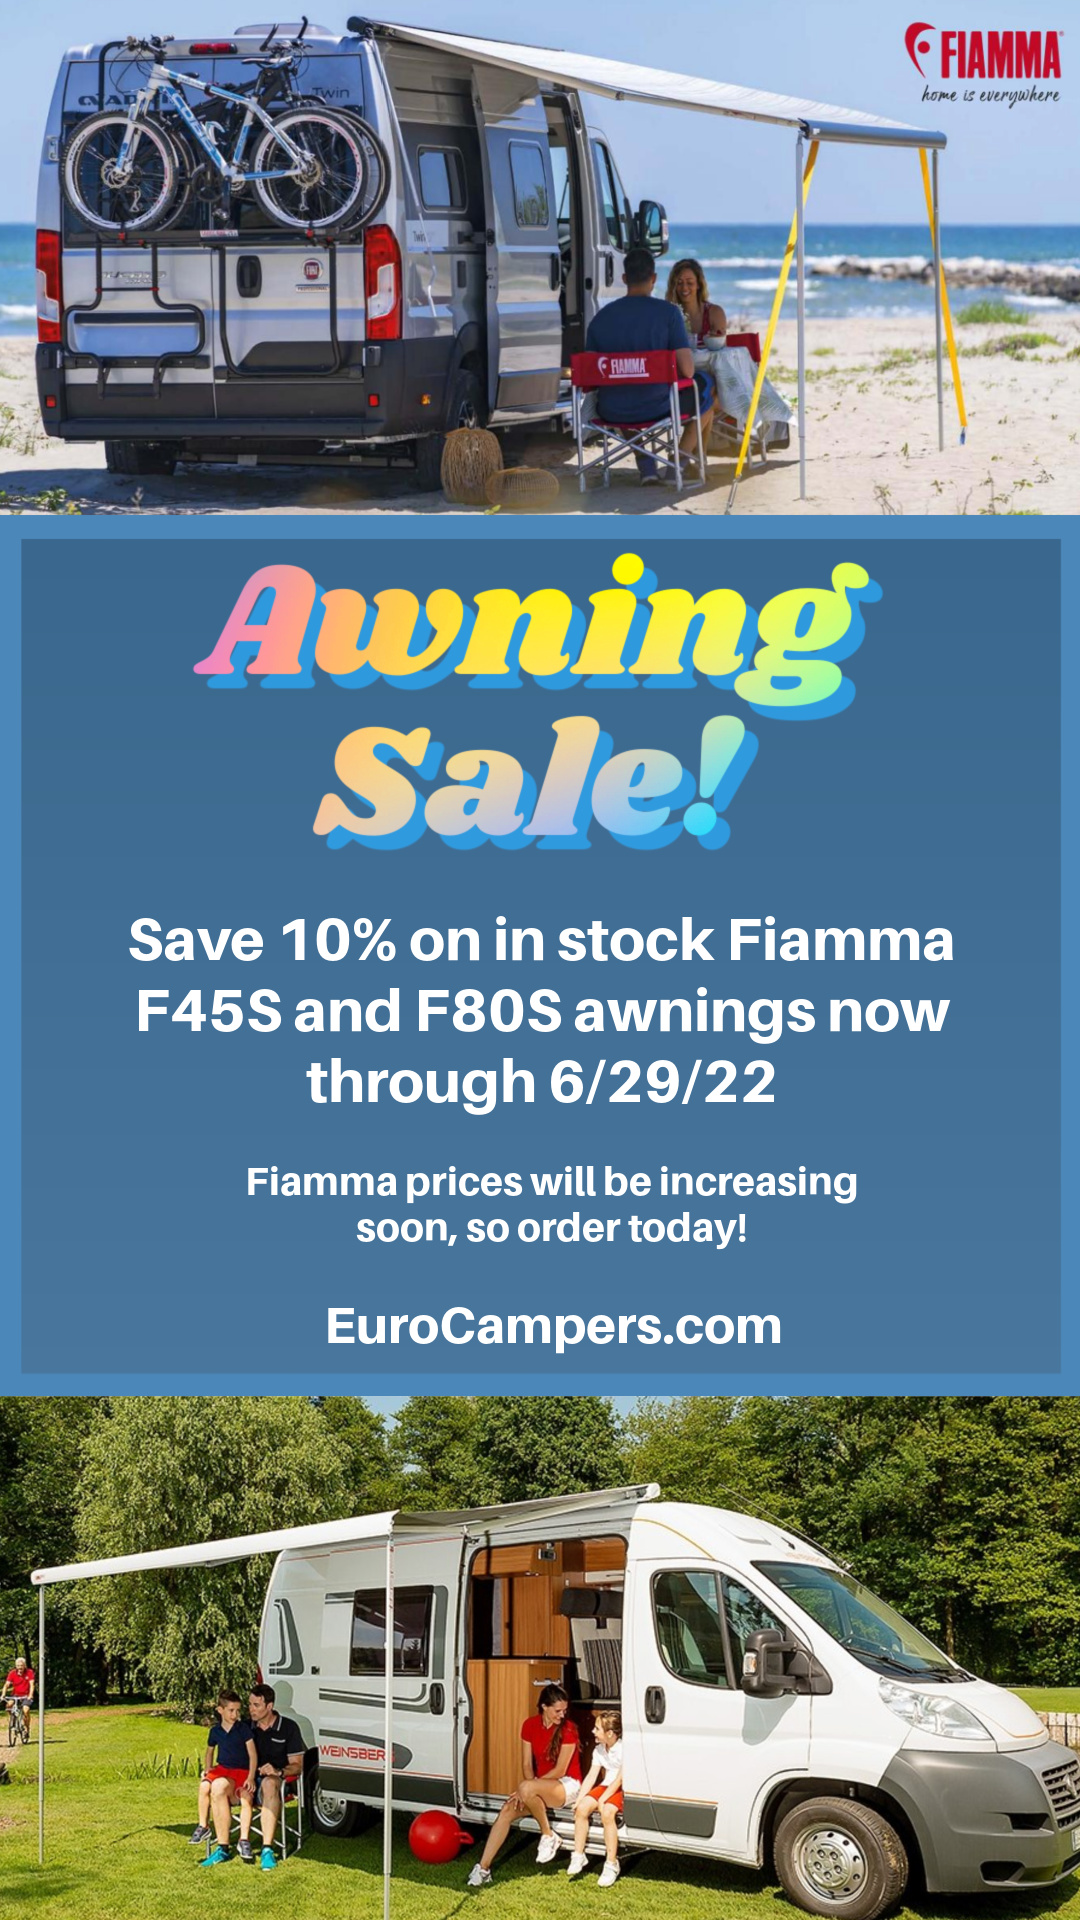 EuroCampers Fiamma Awning Sale